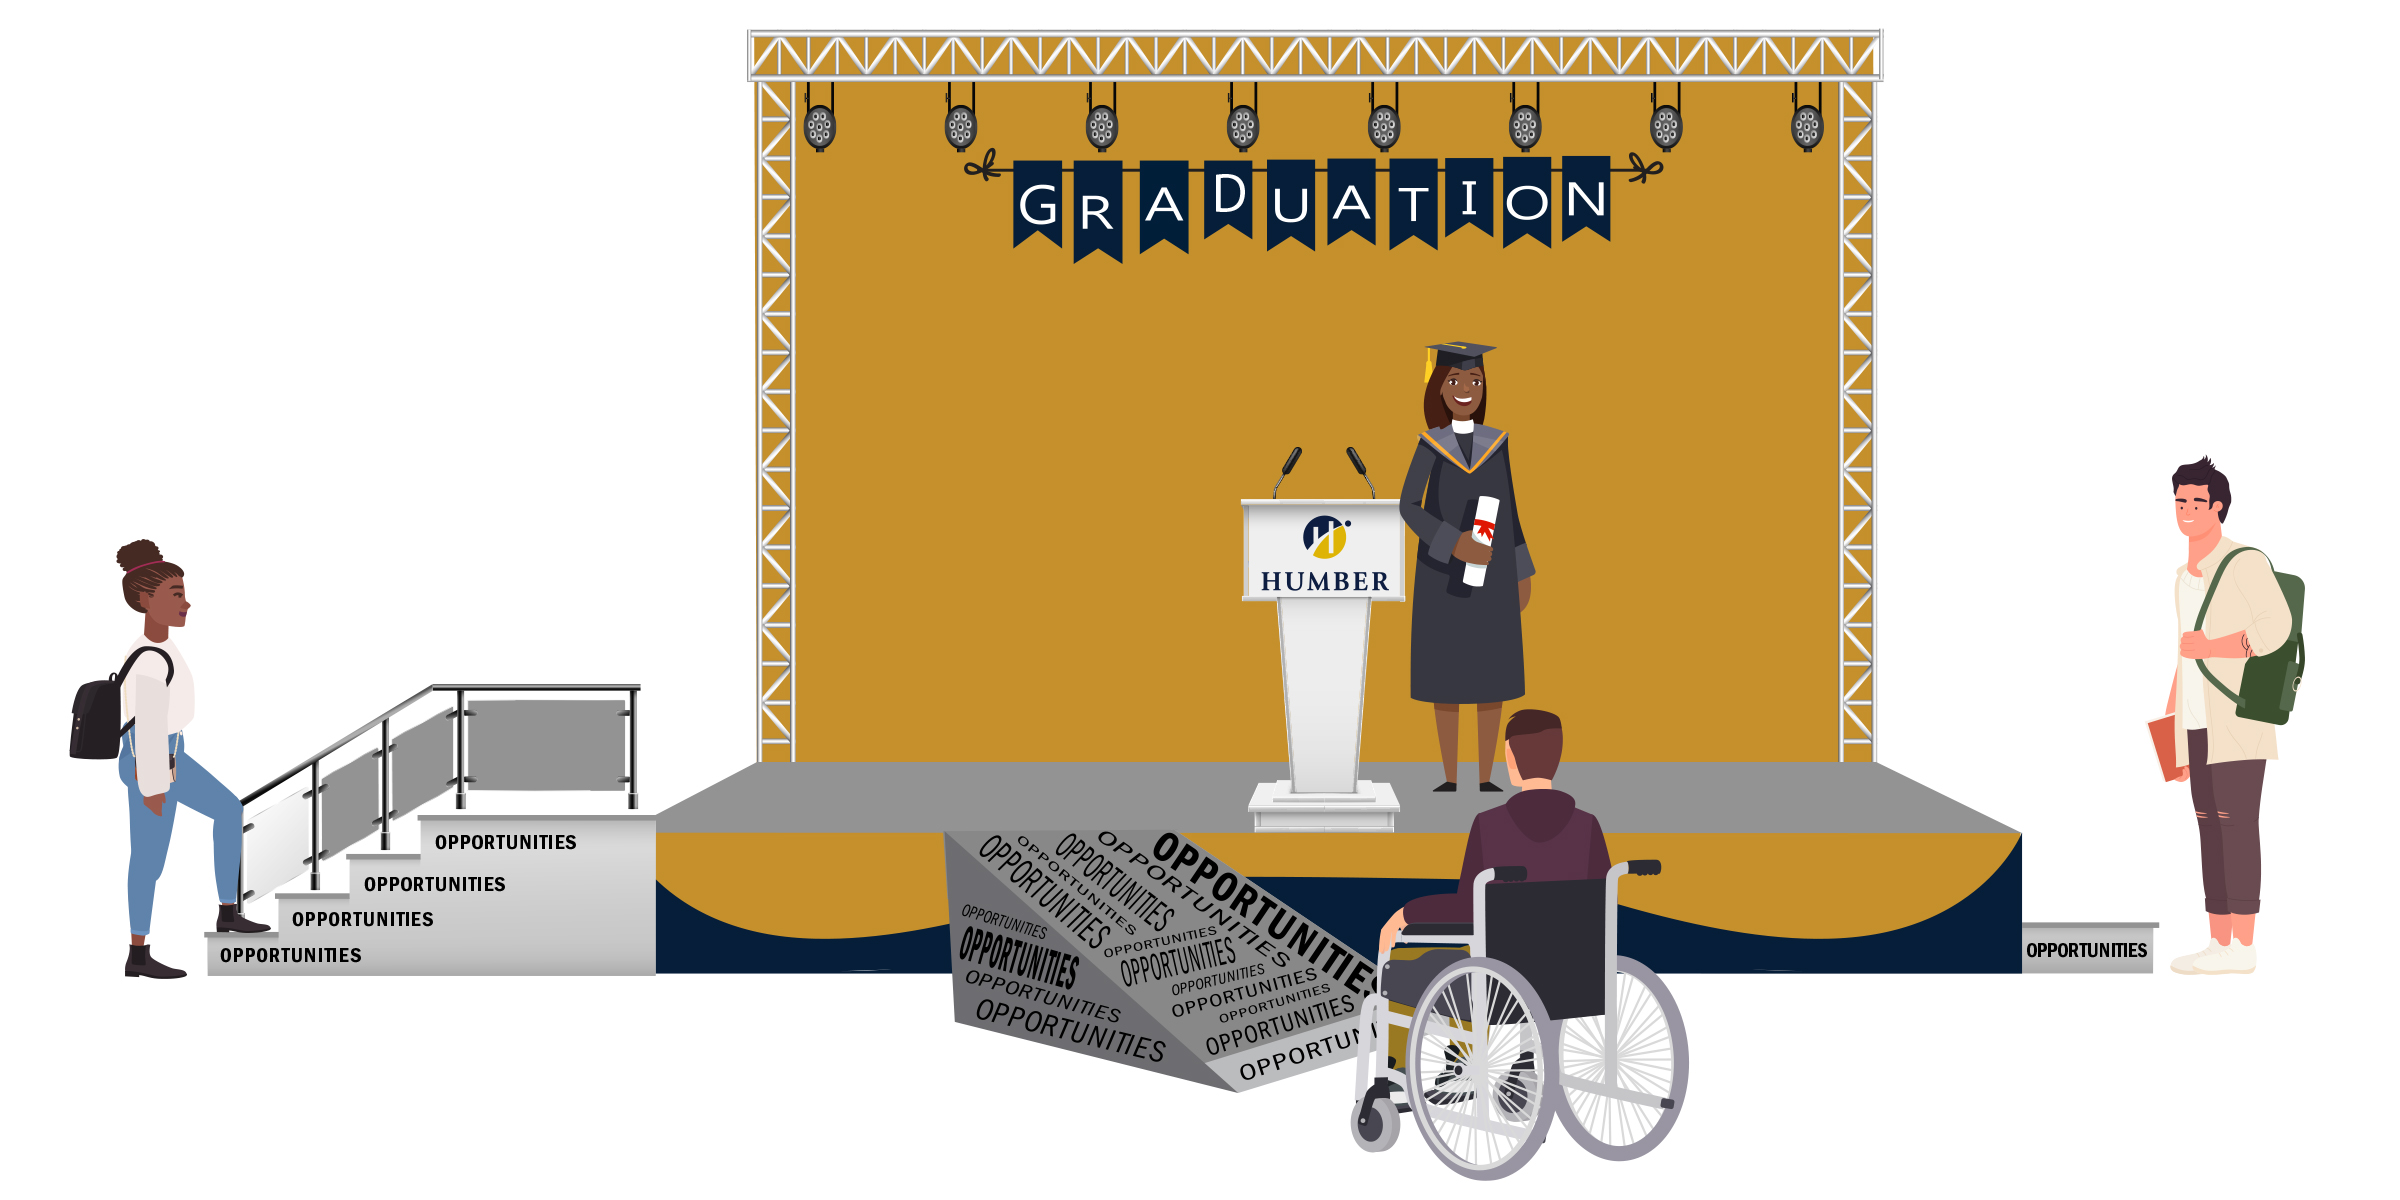 An illustration showing a person going up stairs, a person in a wheelchair going up a ramp toward a graduation ceremony with the words Opportunities on the stairs and ramp